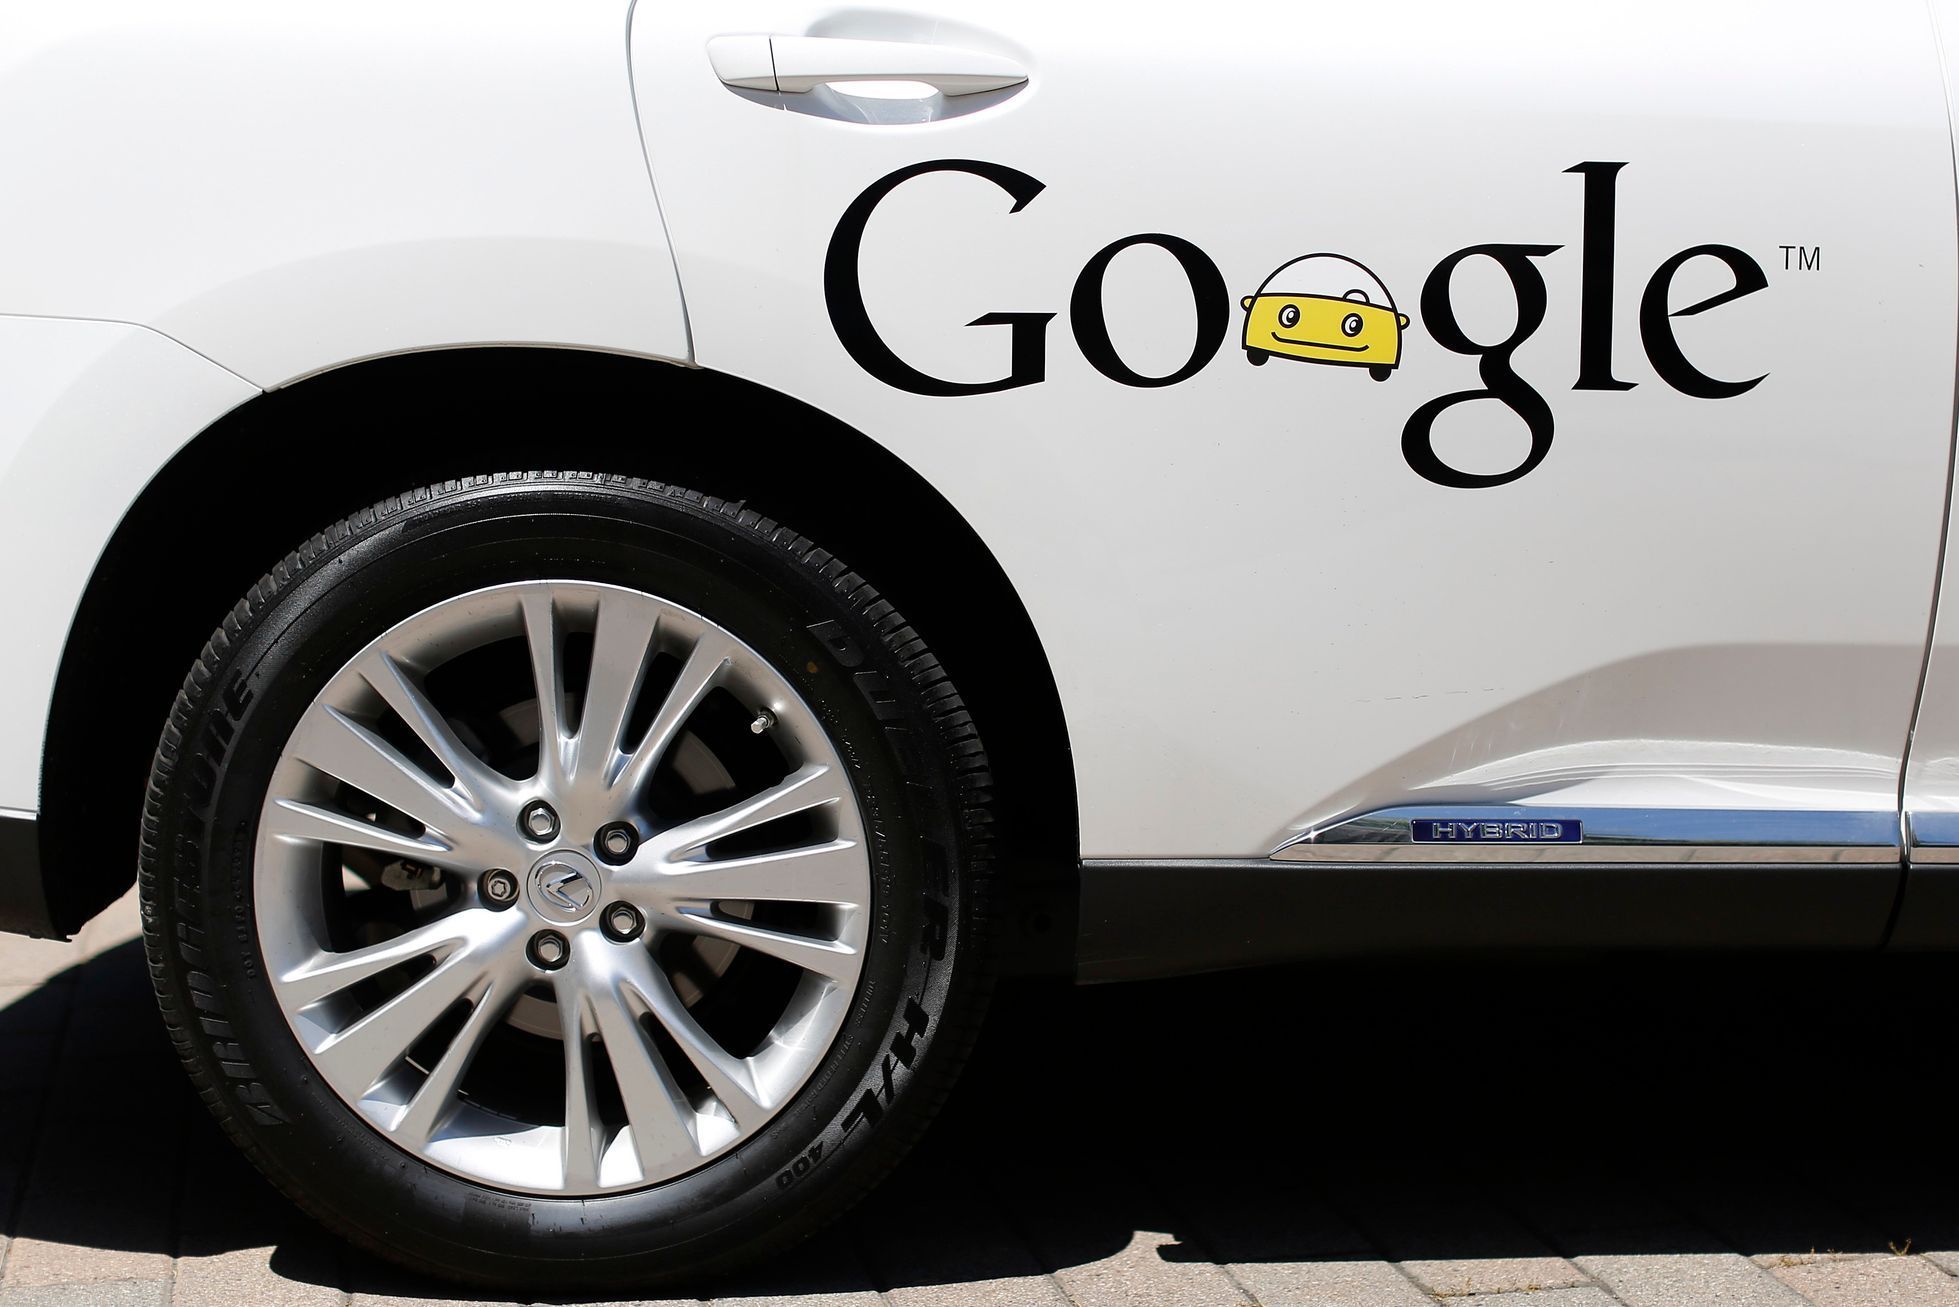 Google presents self-driving car in Mountain View